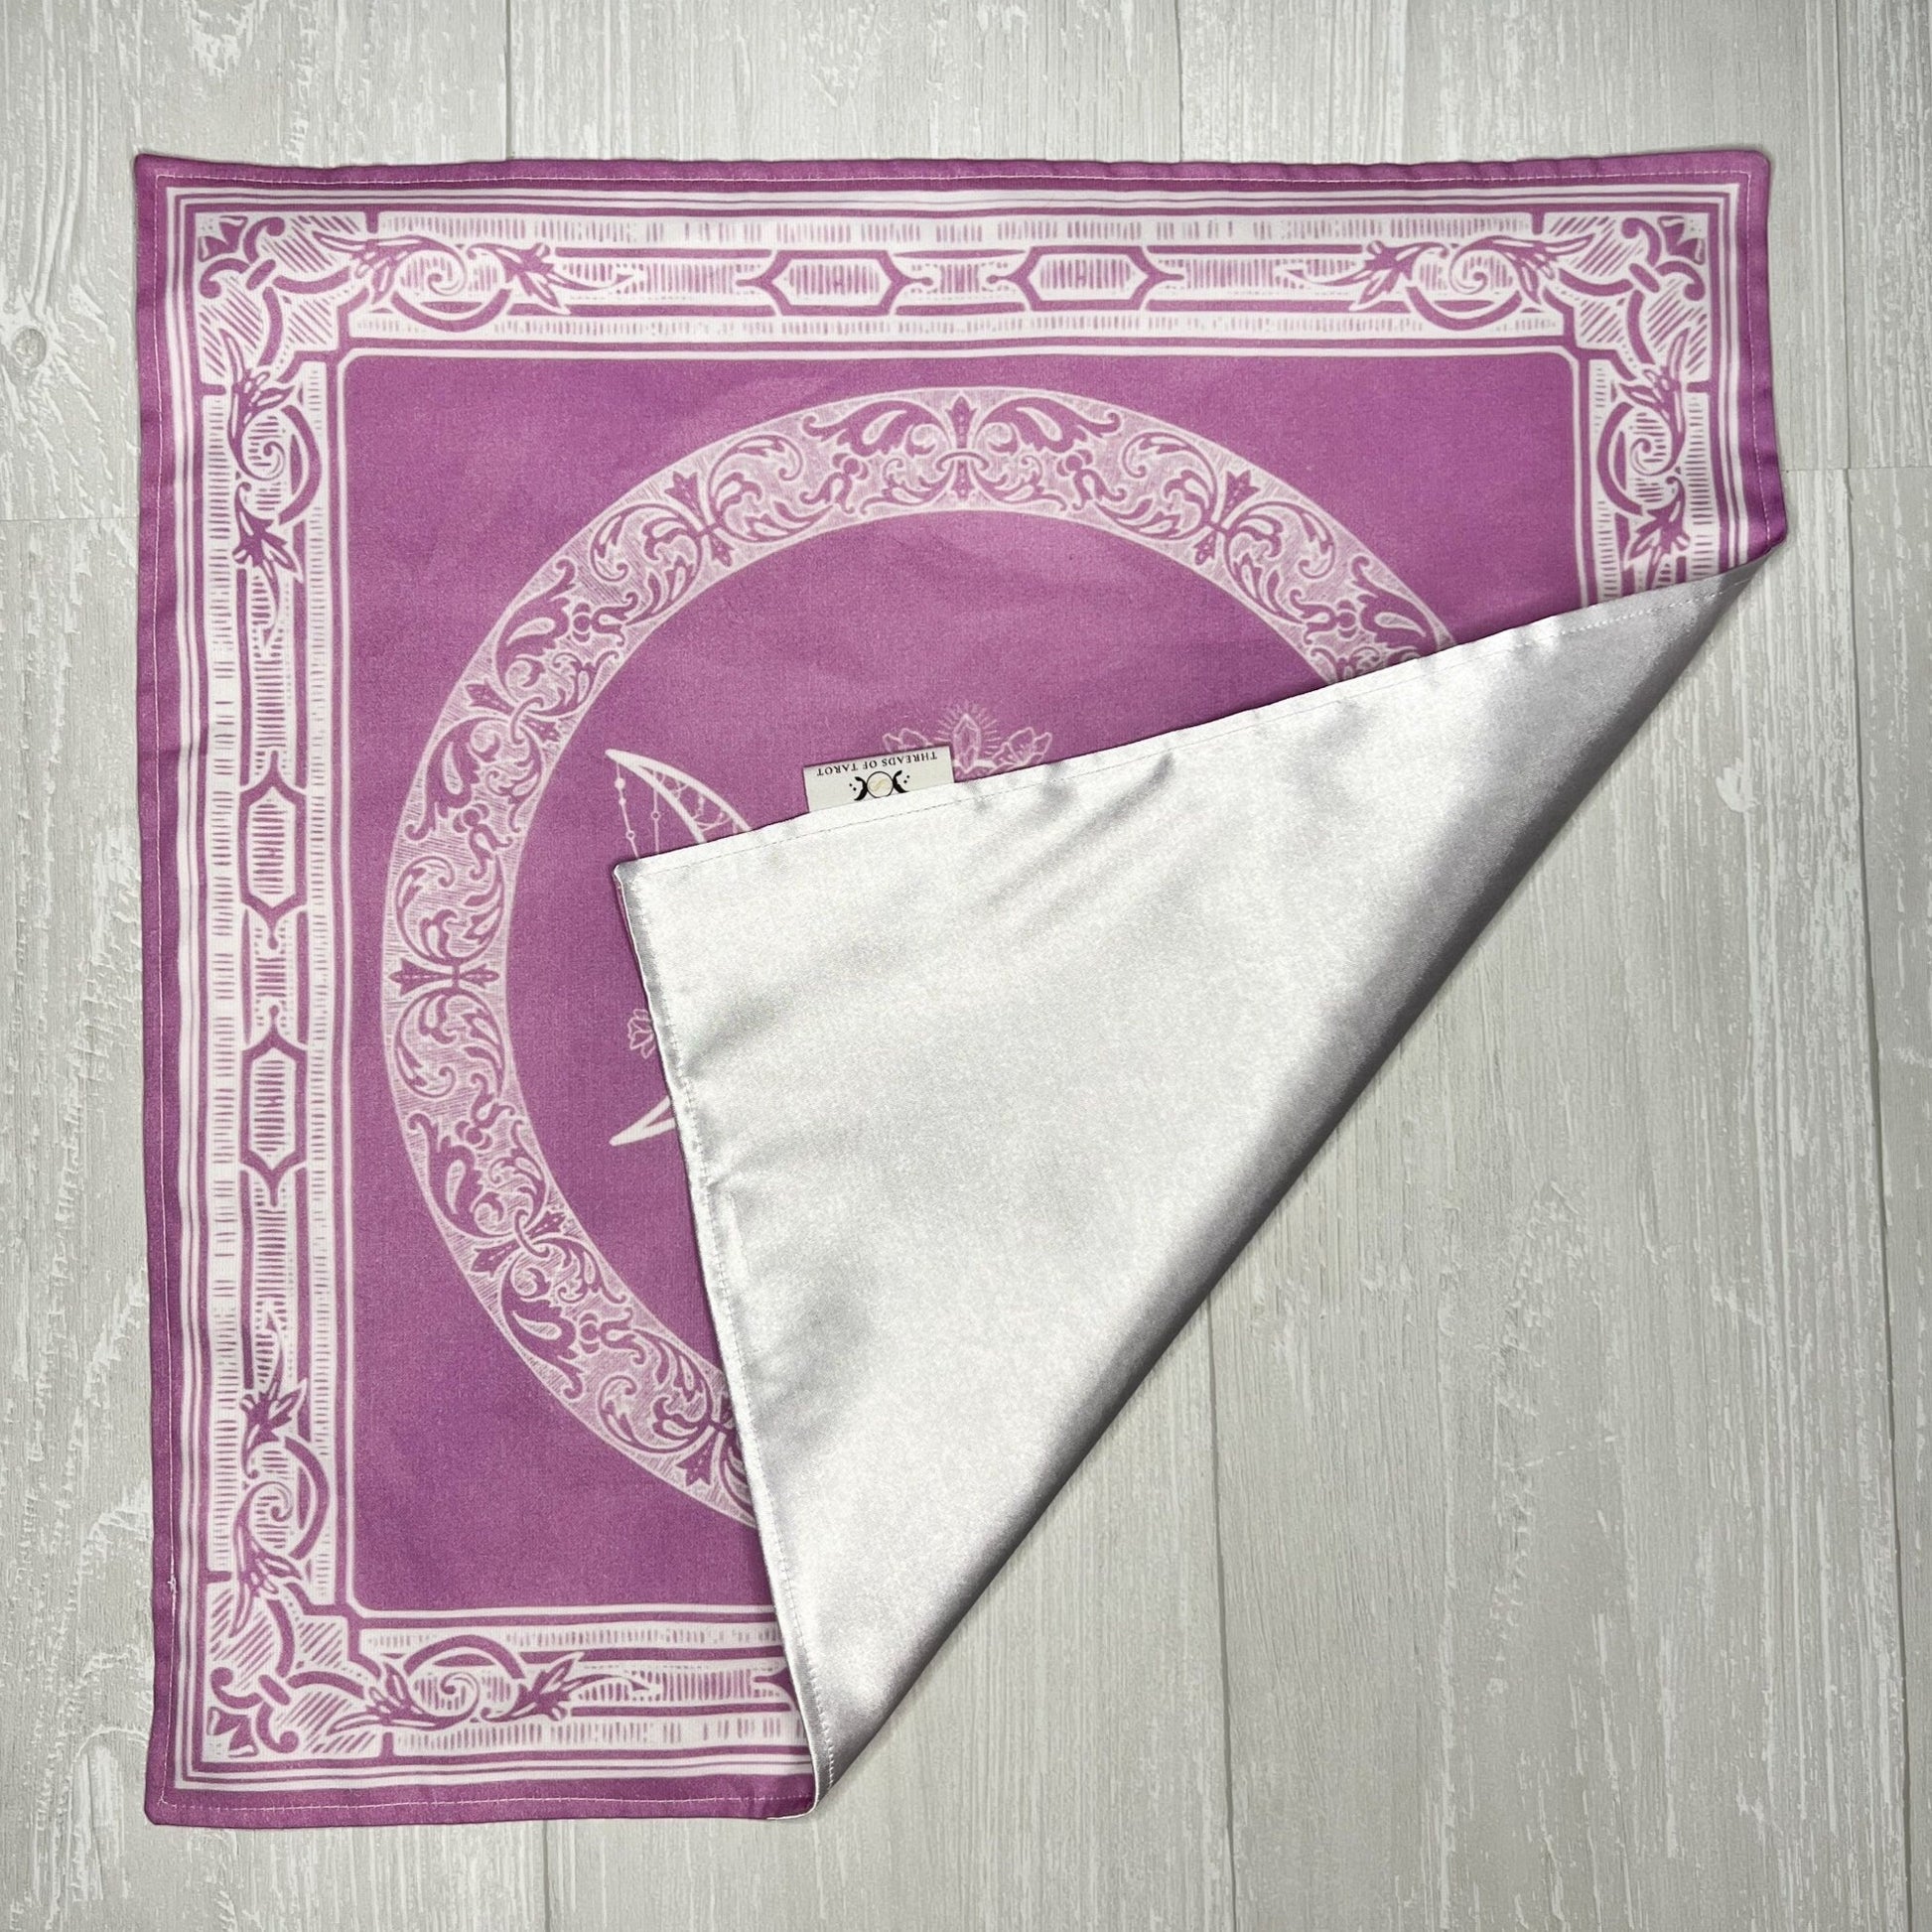 Triple Goddess Triquetra Altar Cloth, Tarot Cloth, Rune Casting Ritual Cloth, Tarot Reading Supplies, Pagan Witchcraft Wiccan Gift Supplies